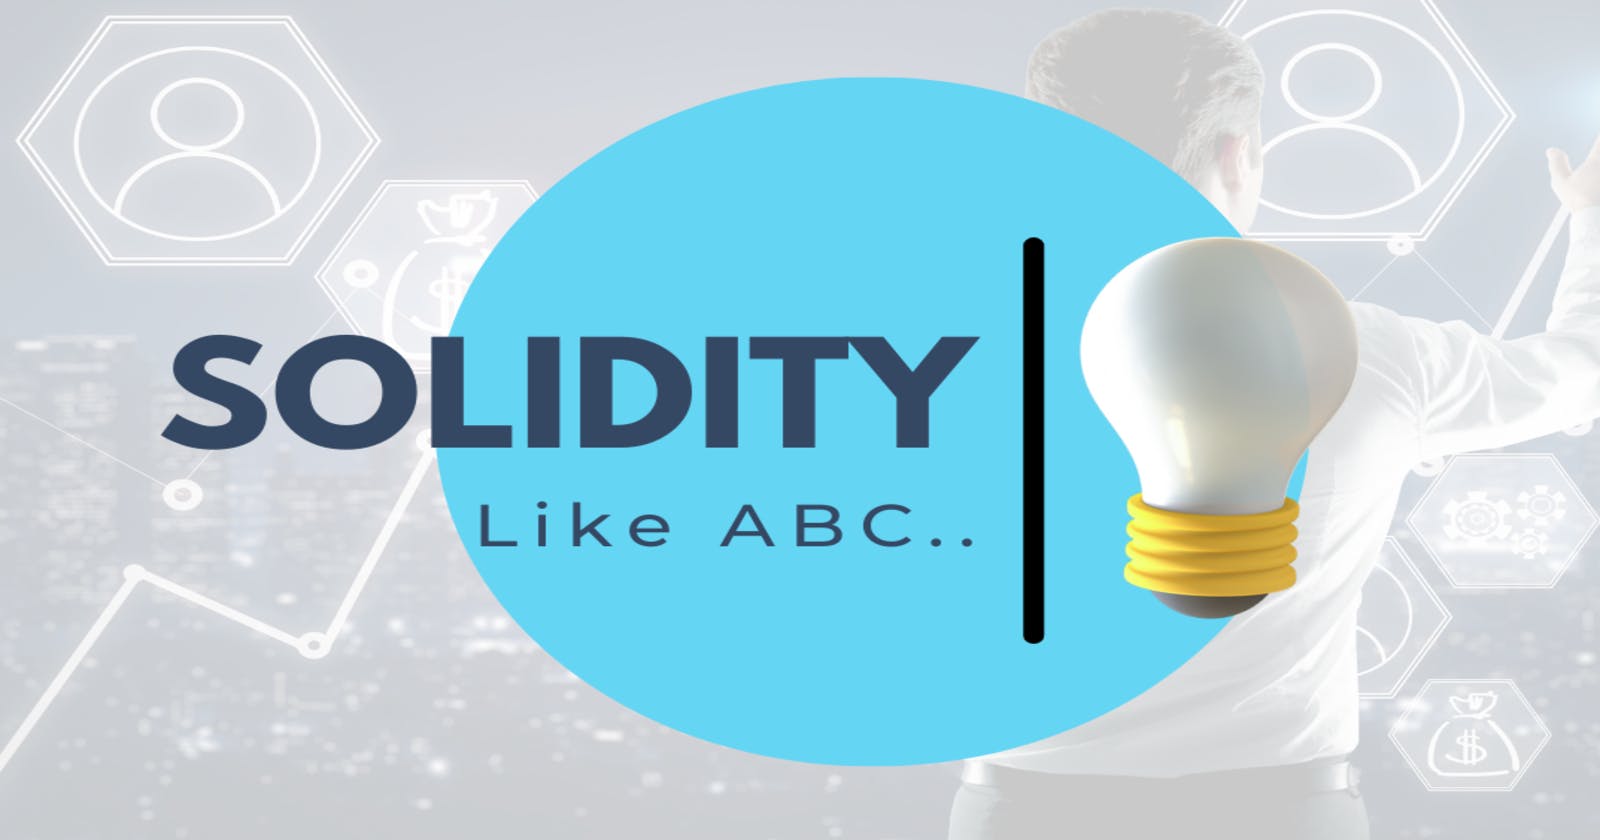 Solidity like ABC